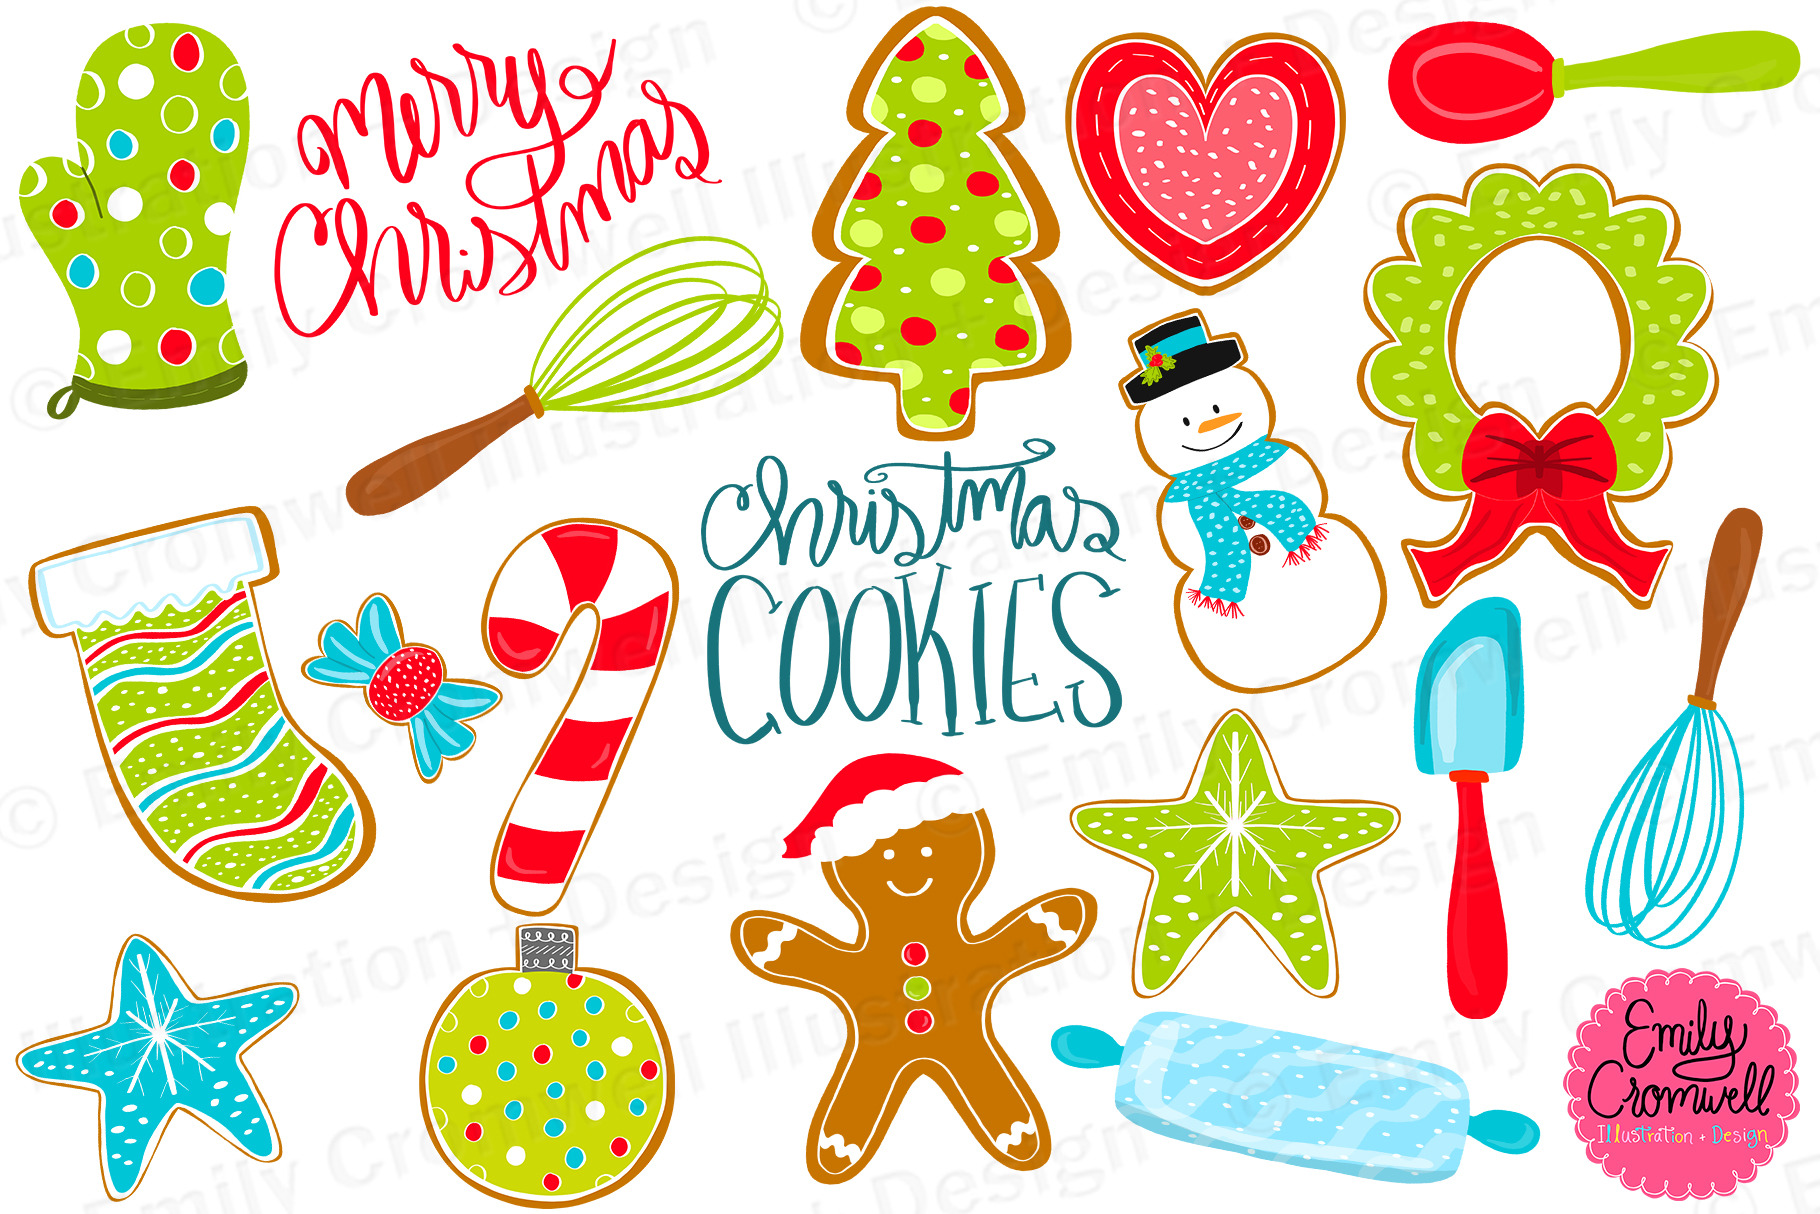 Christmas Cookie Images : Three Easy Christmas Cookie Recipes That Will Have People ... / | see more about christmas, cookies and winter.